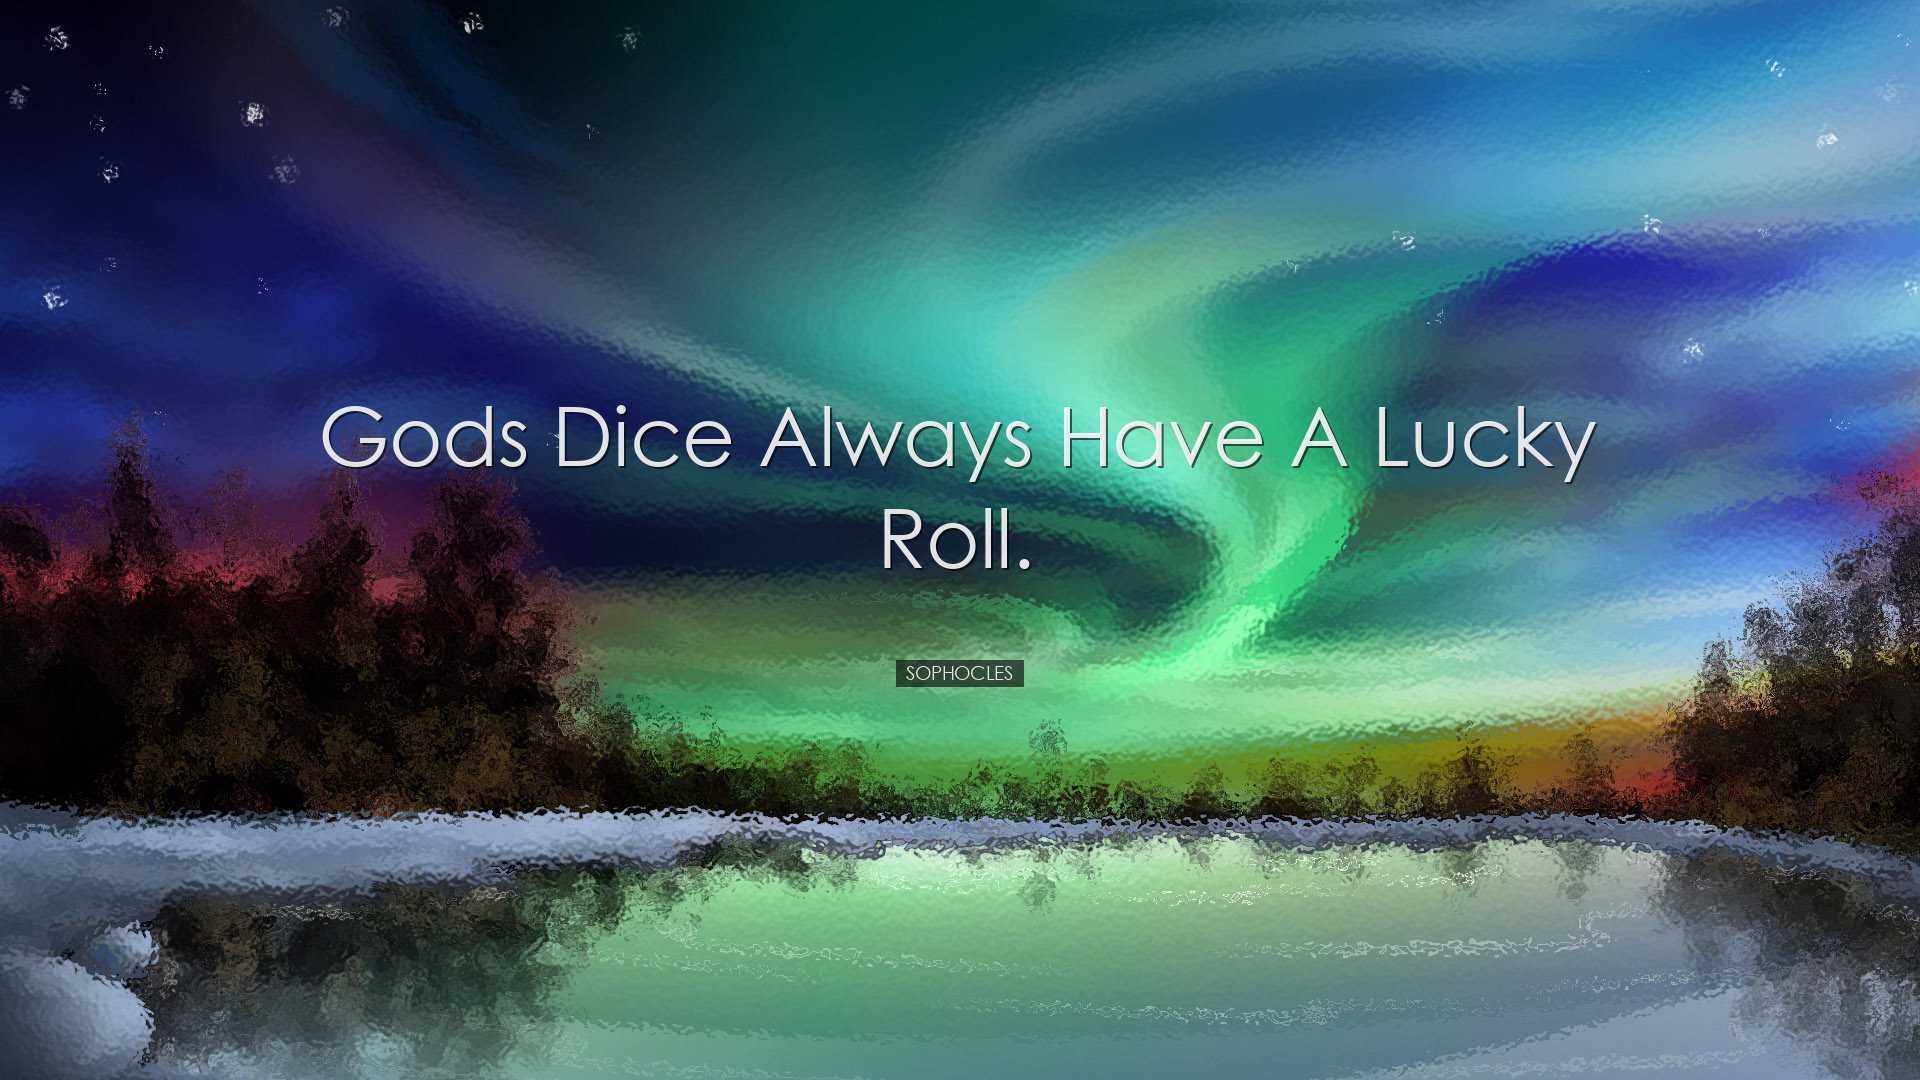 Gods dice always have a lucky roll. - Sophocles